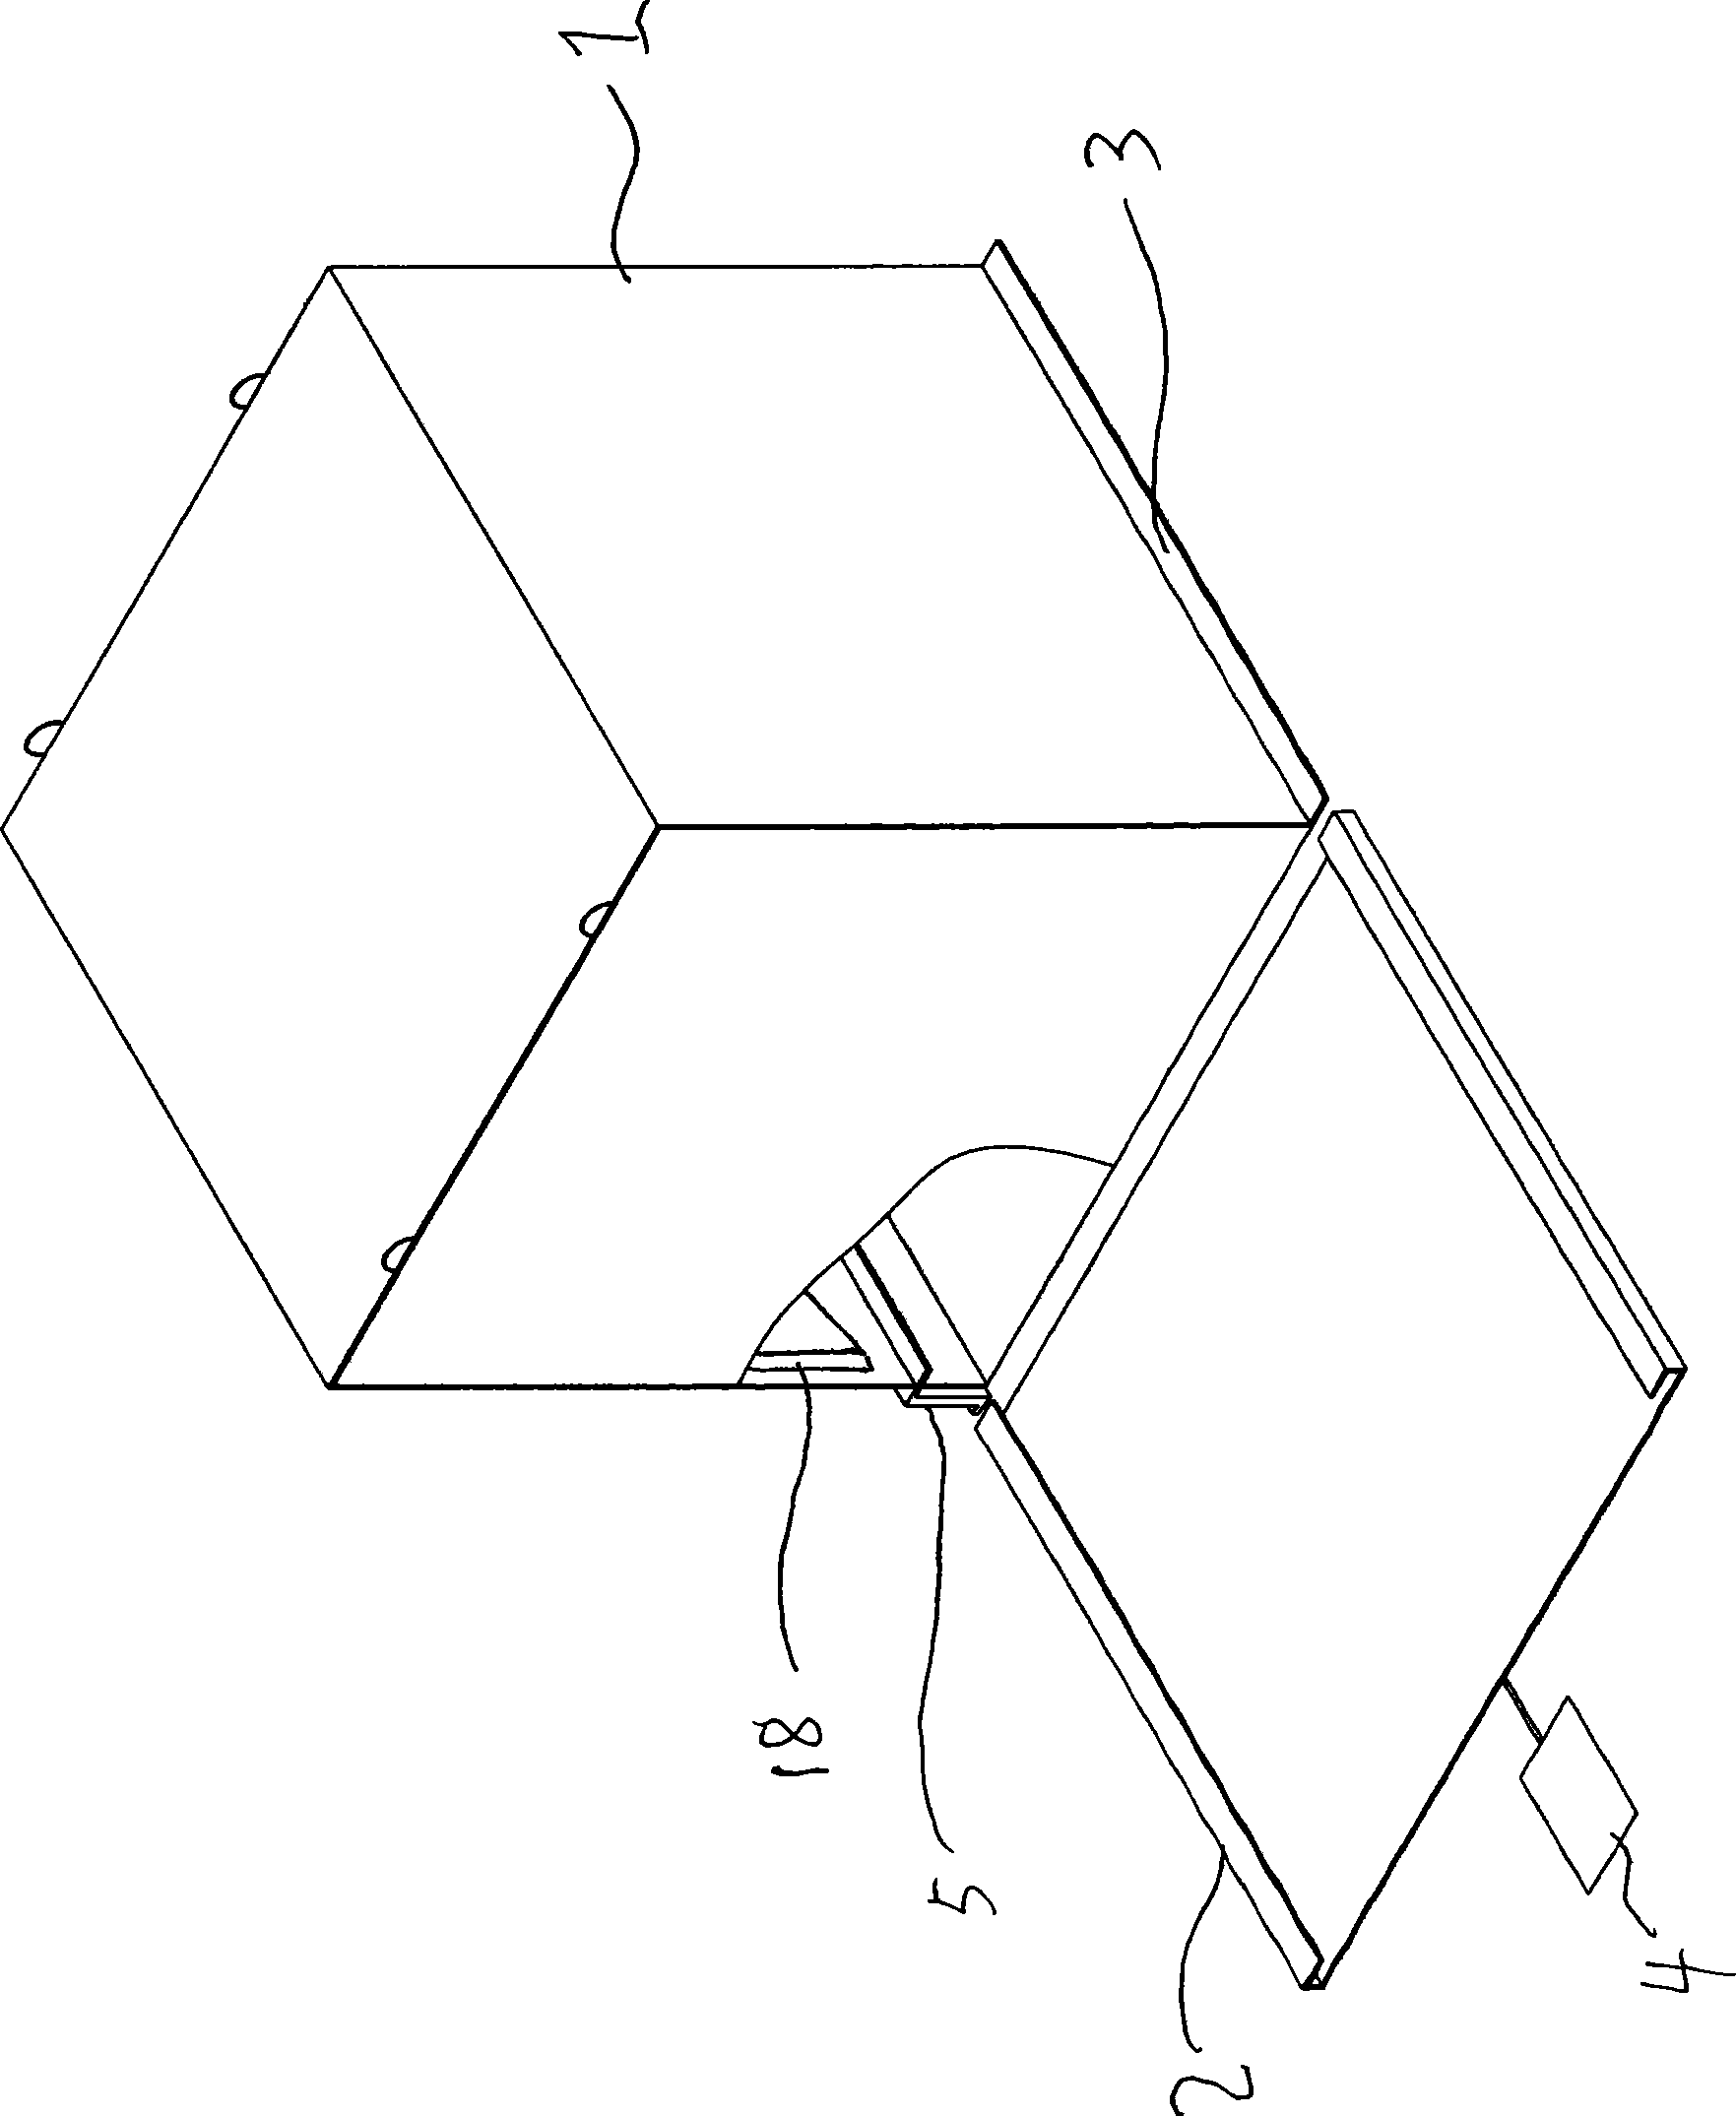 Plot movement device and special cutter maintaining undisturbed soil free from loss, and method for plot movement using device